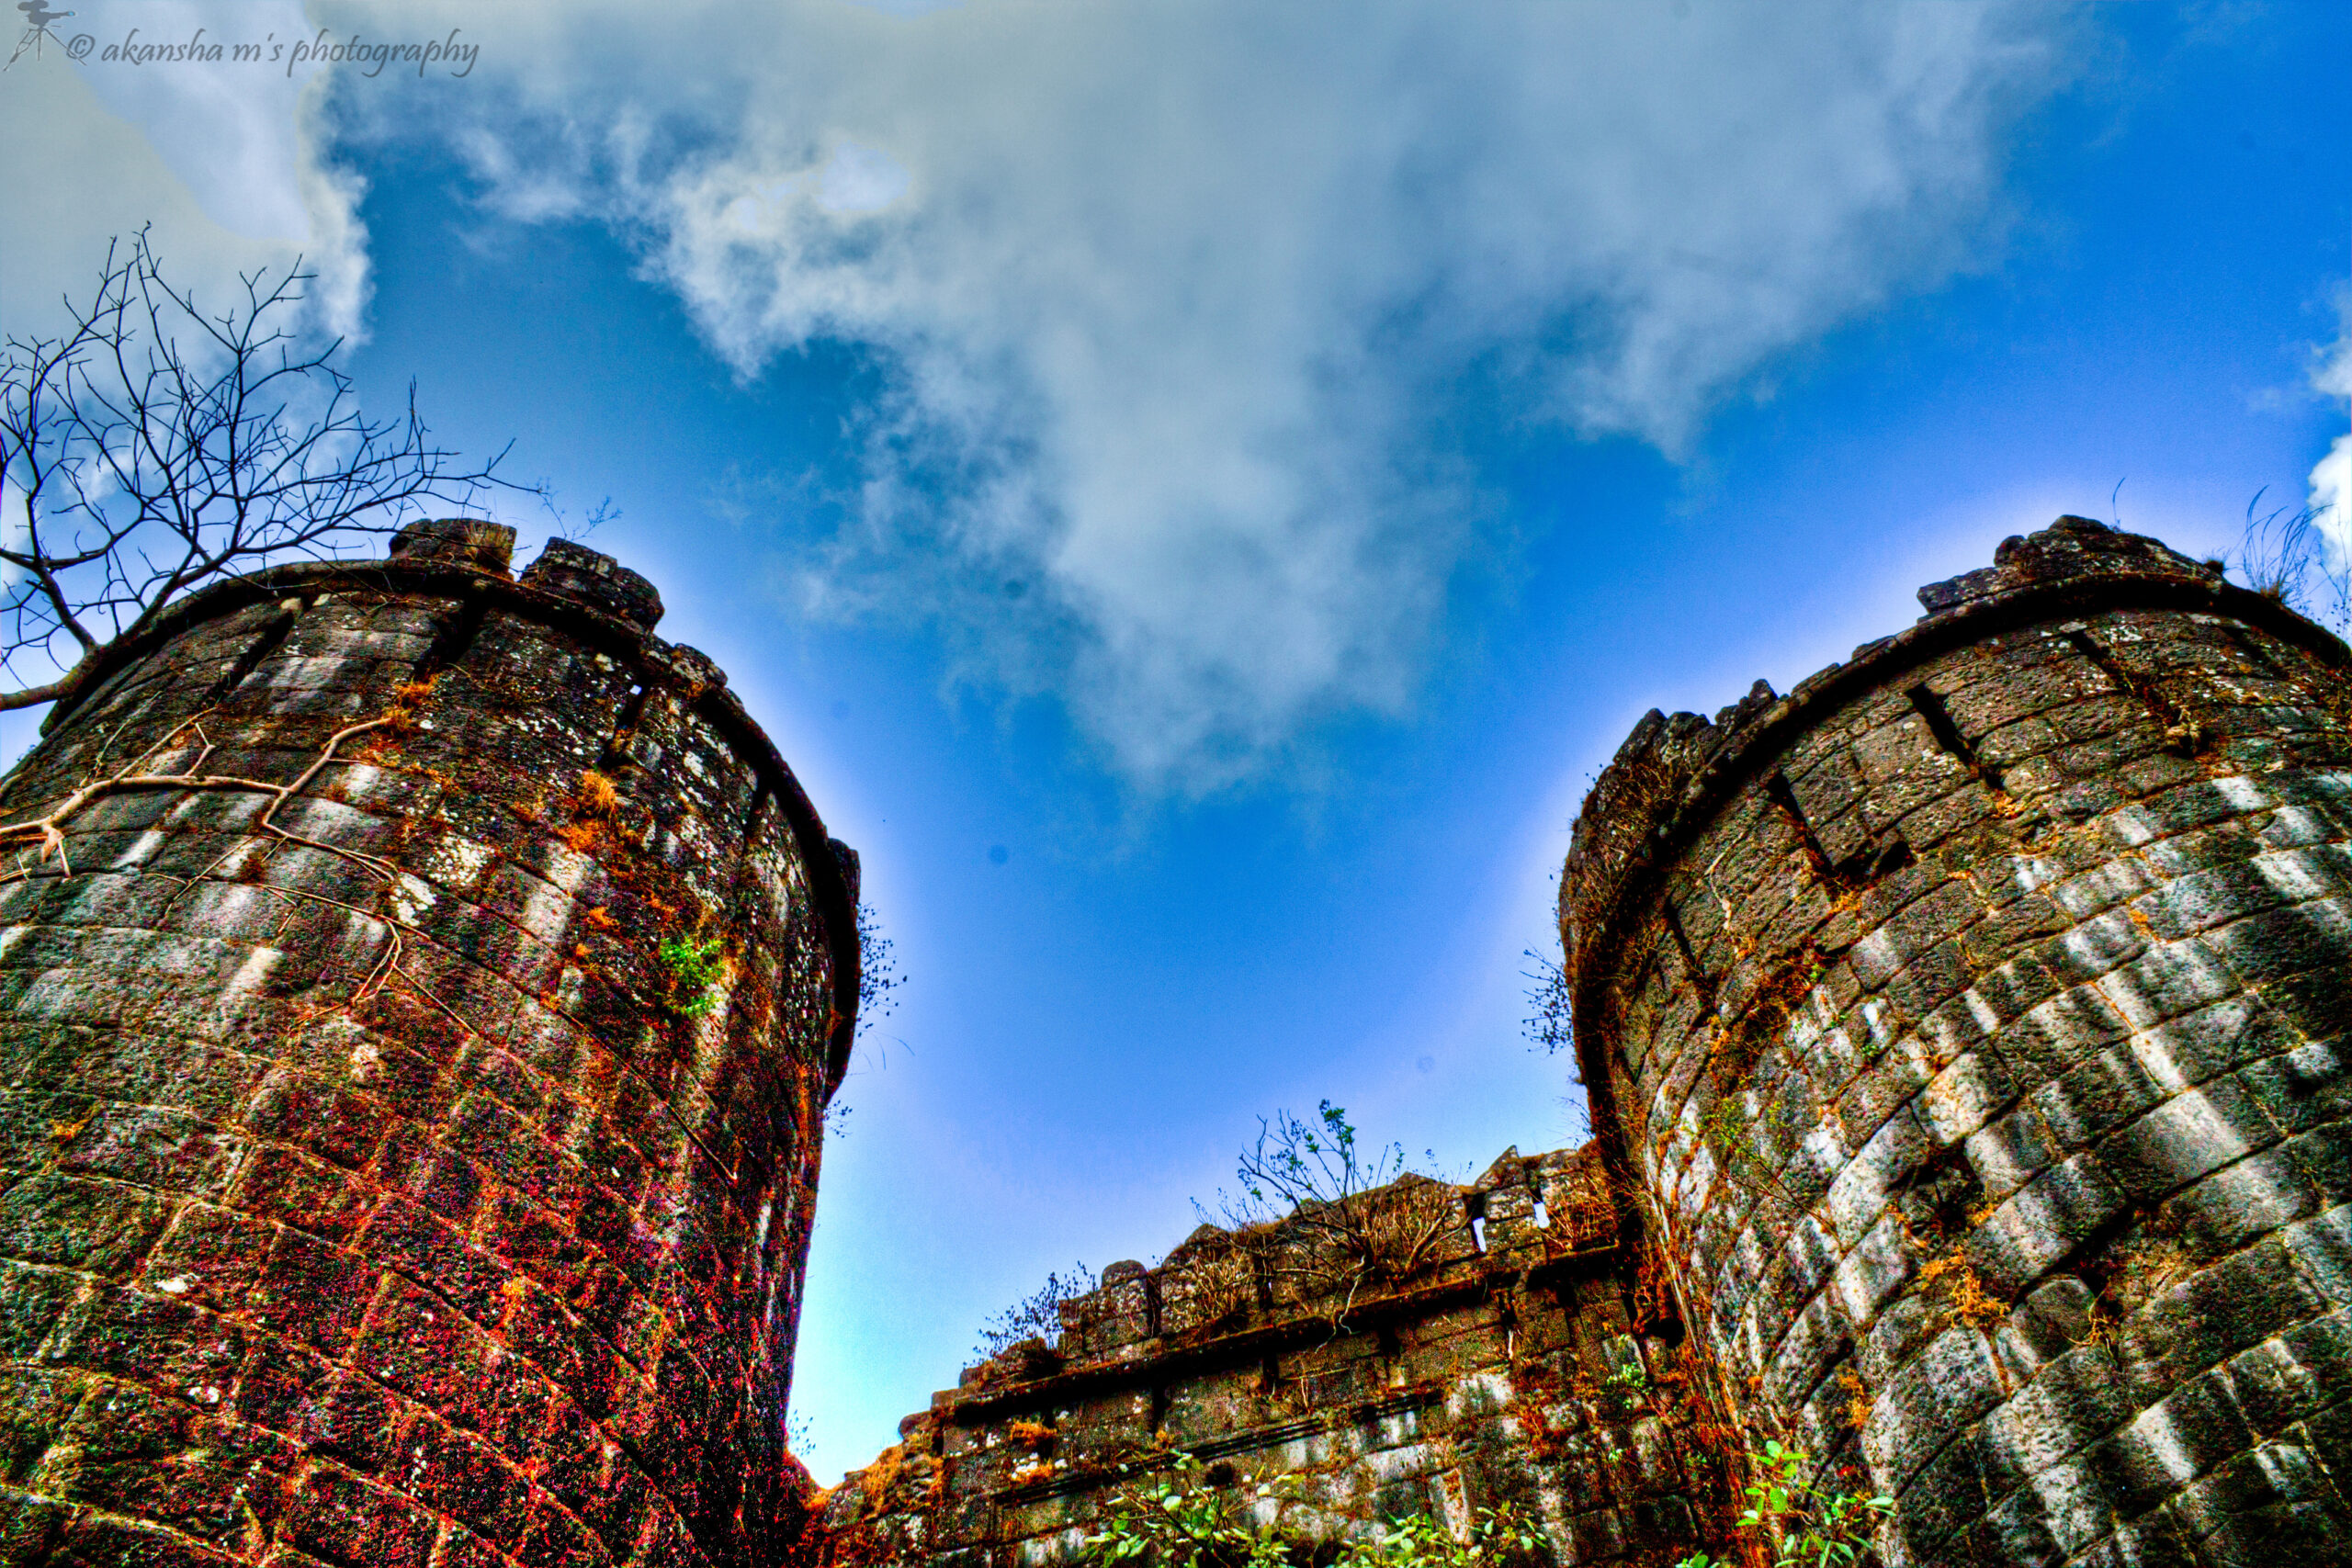 Sinhagad fort, ancient ruins, historical architecture, stone towers, HDR photography, cultural heritage, Indian forts, vibrant colors, ancient structures